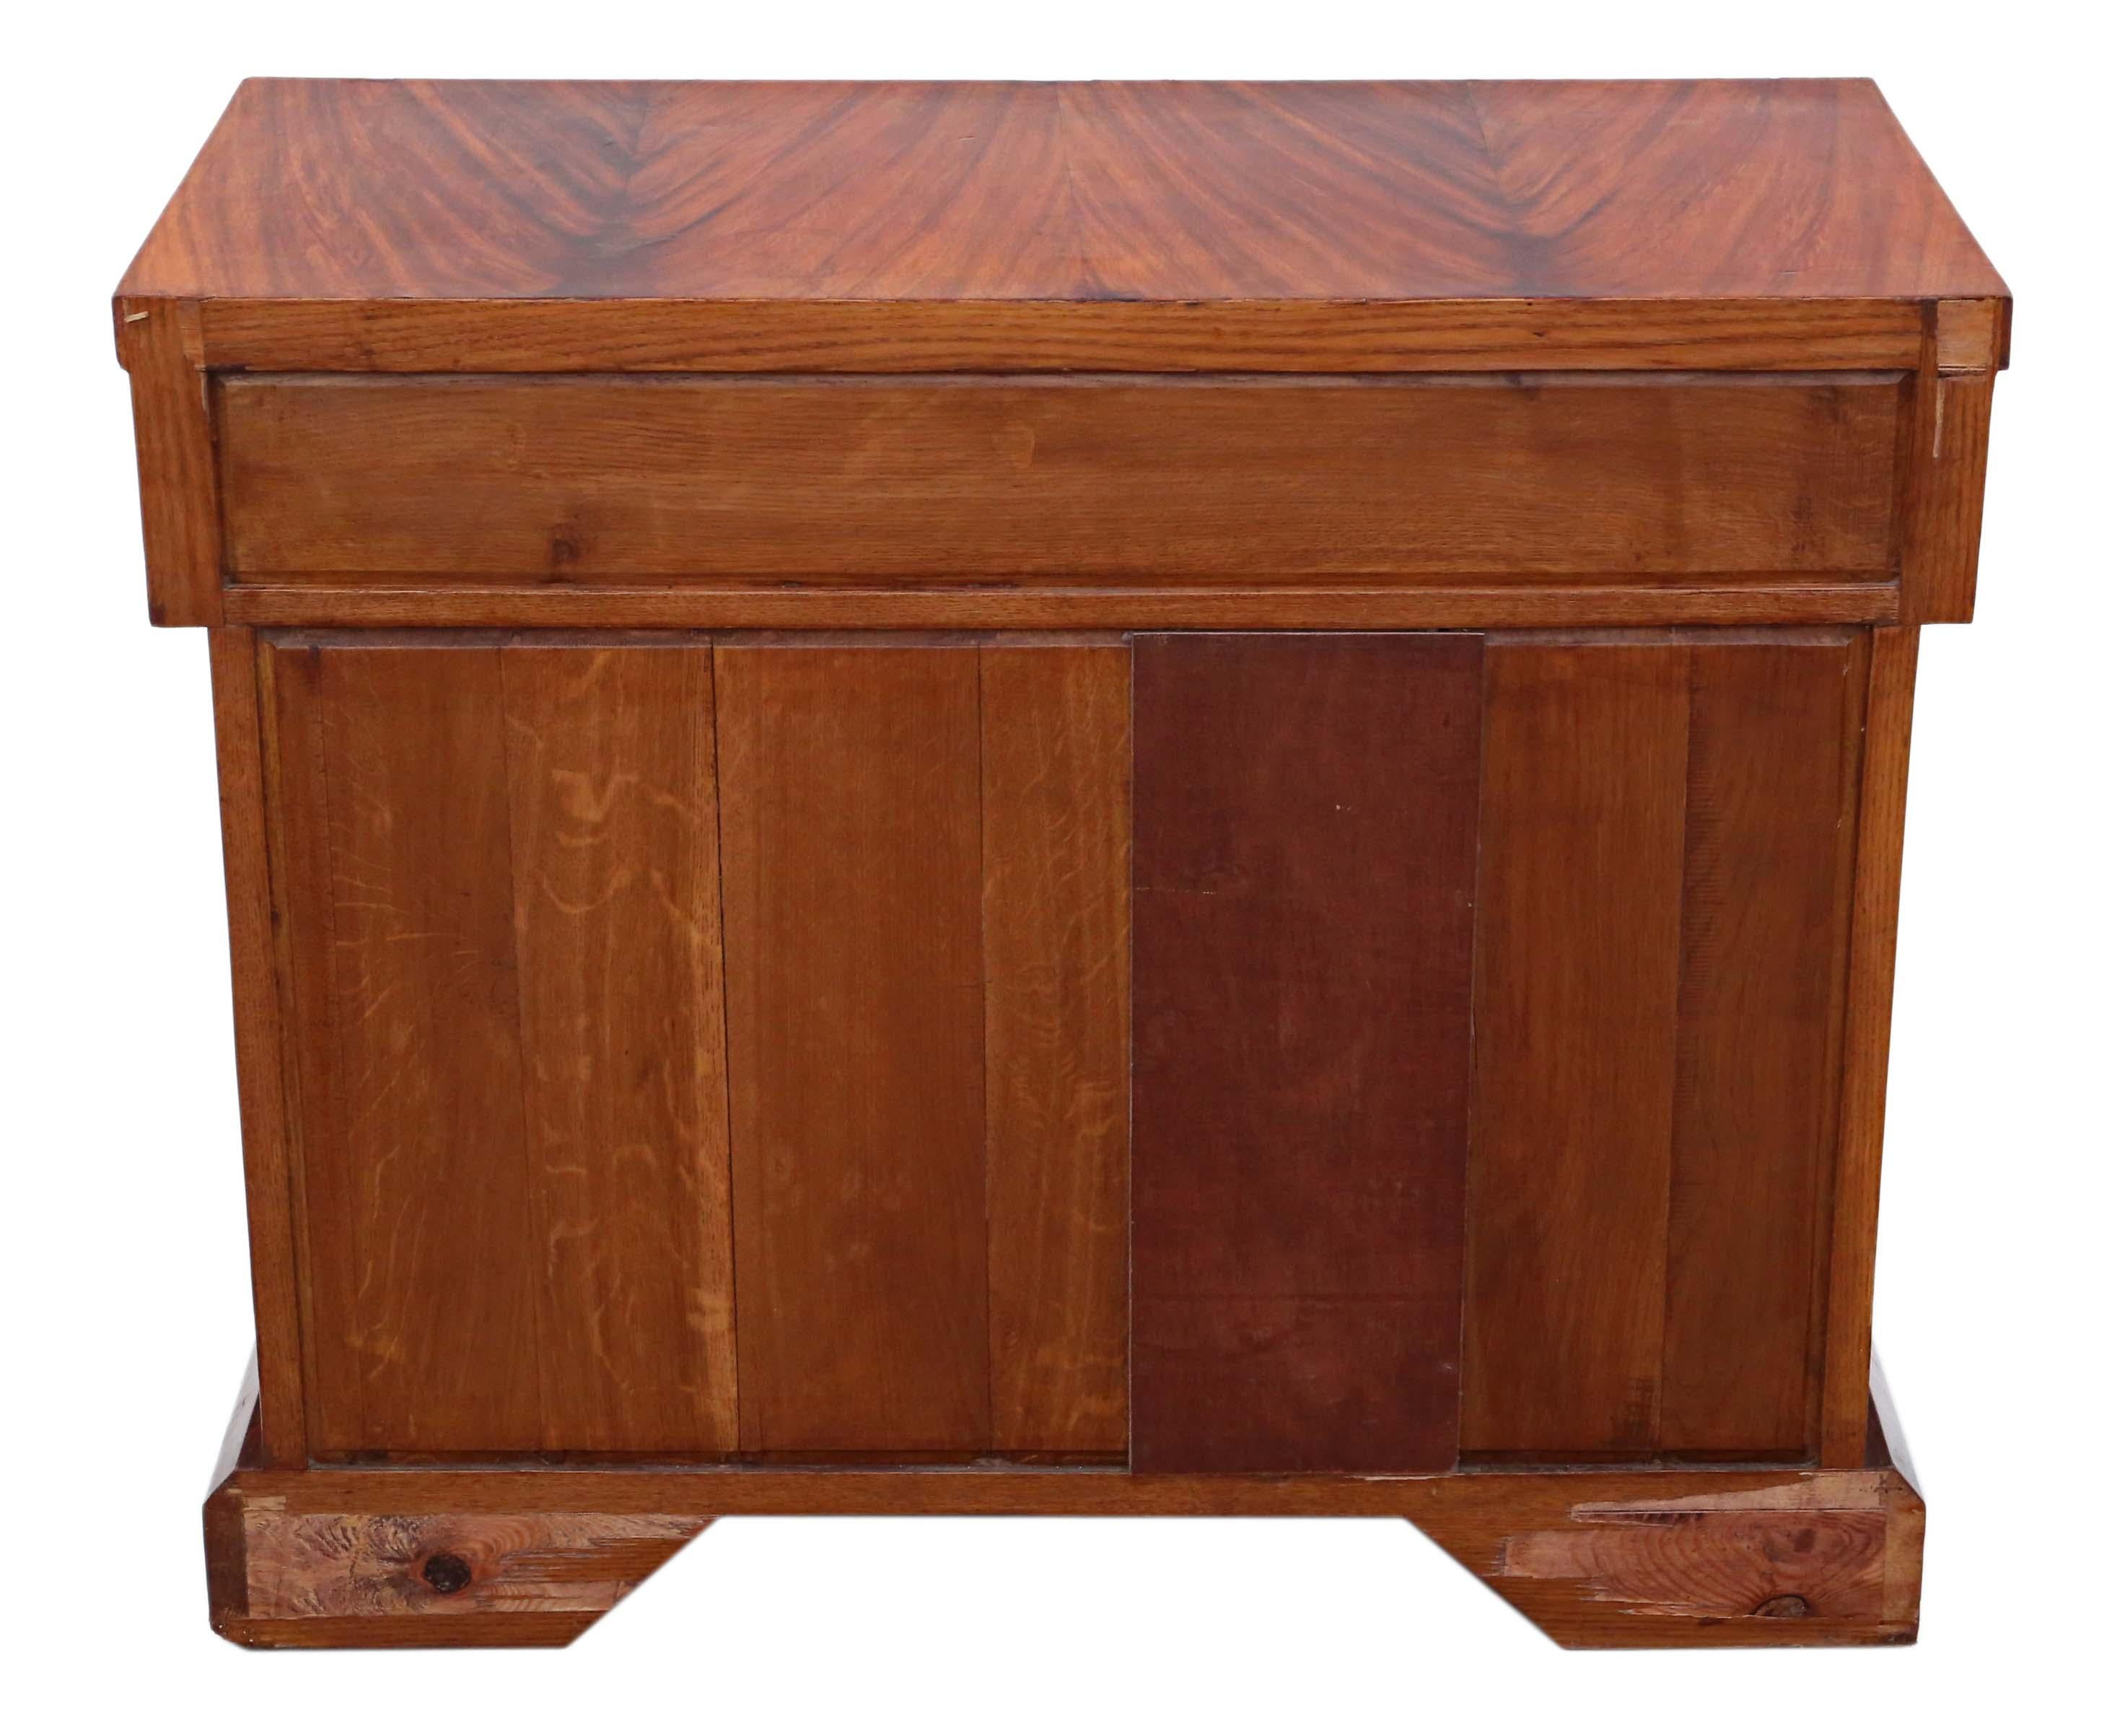 Antique Mahogany Regency Revival Console Cupboard Table For Sale 2